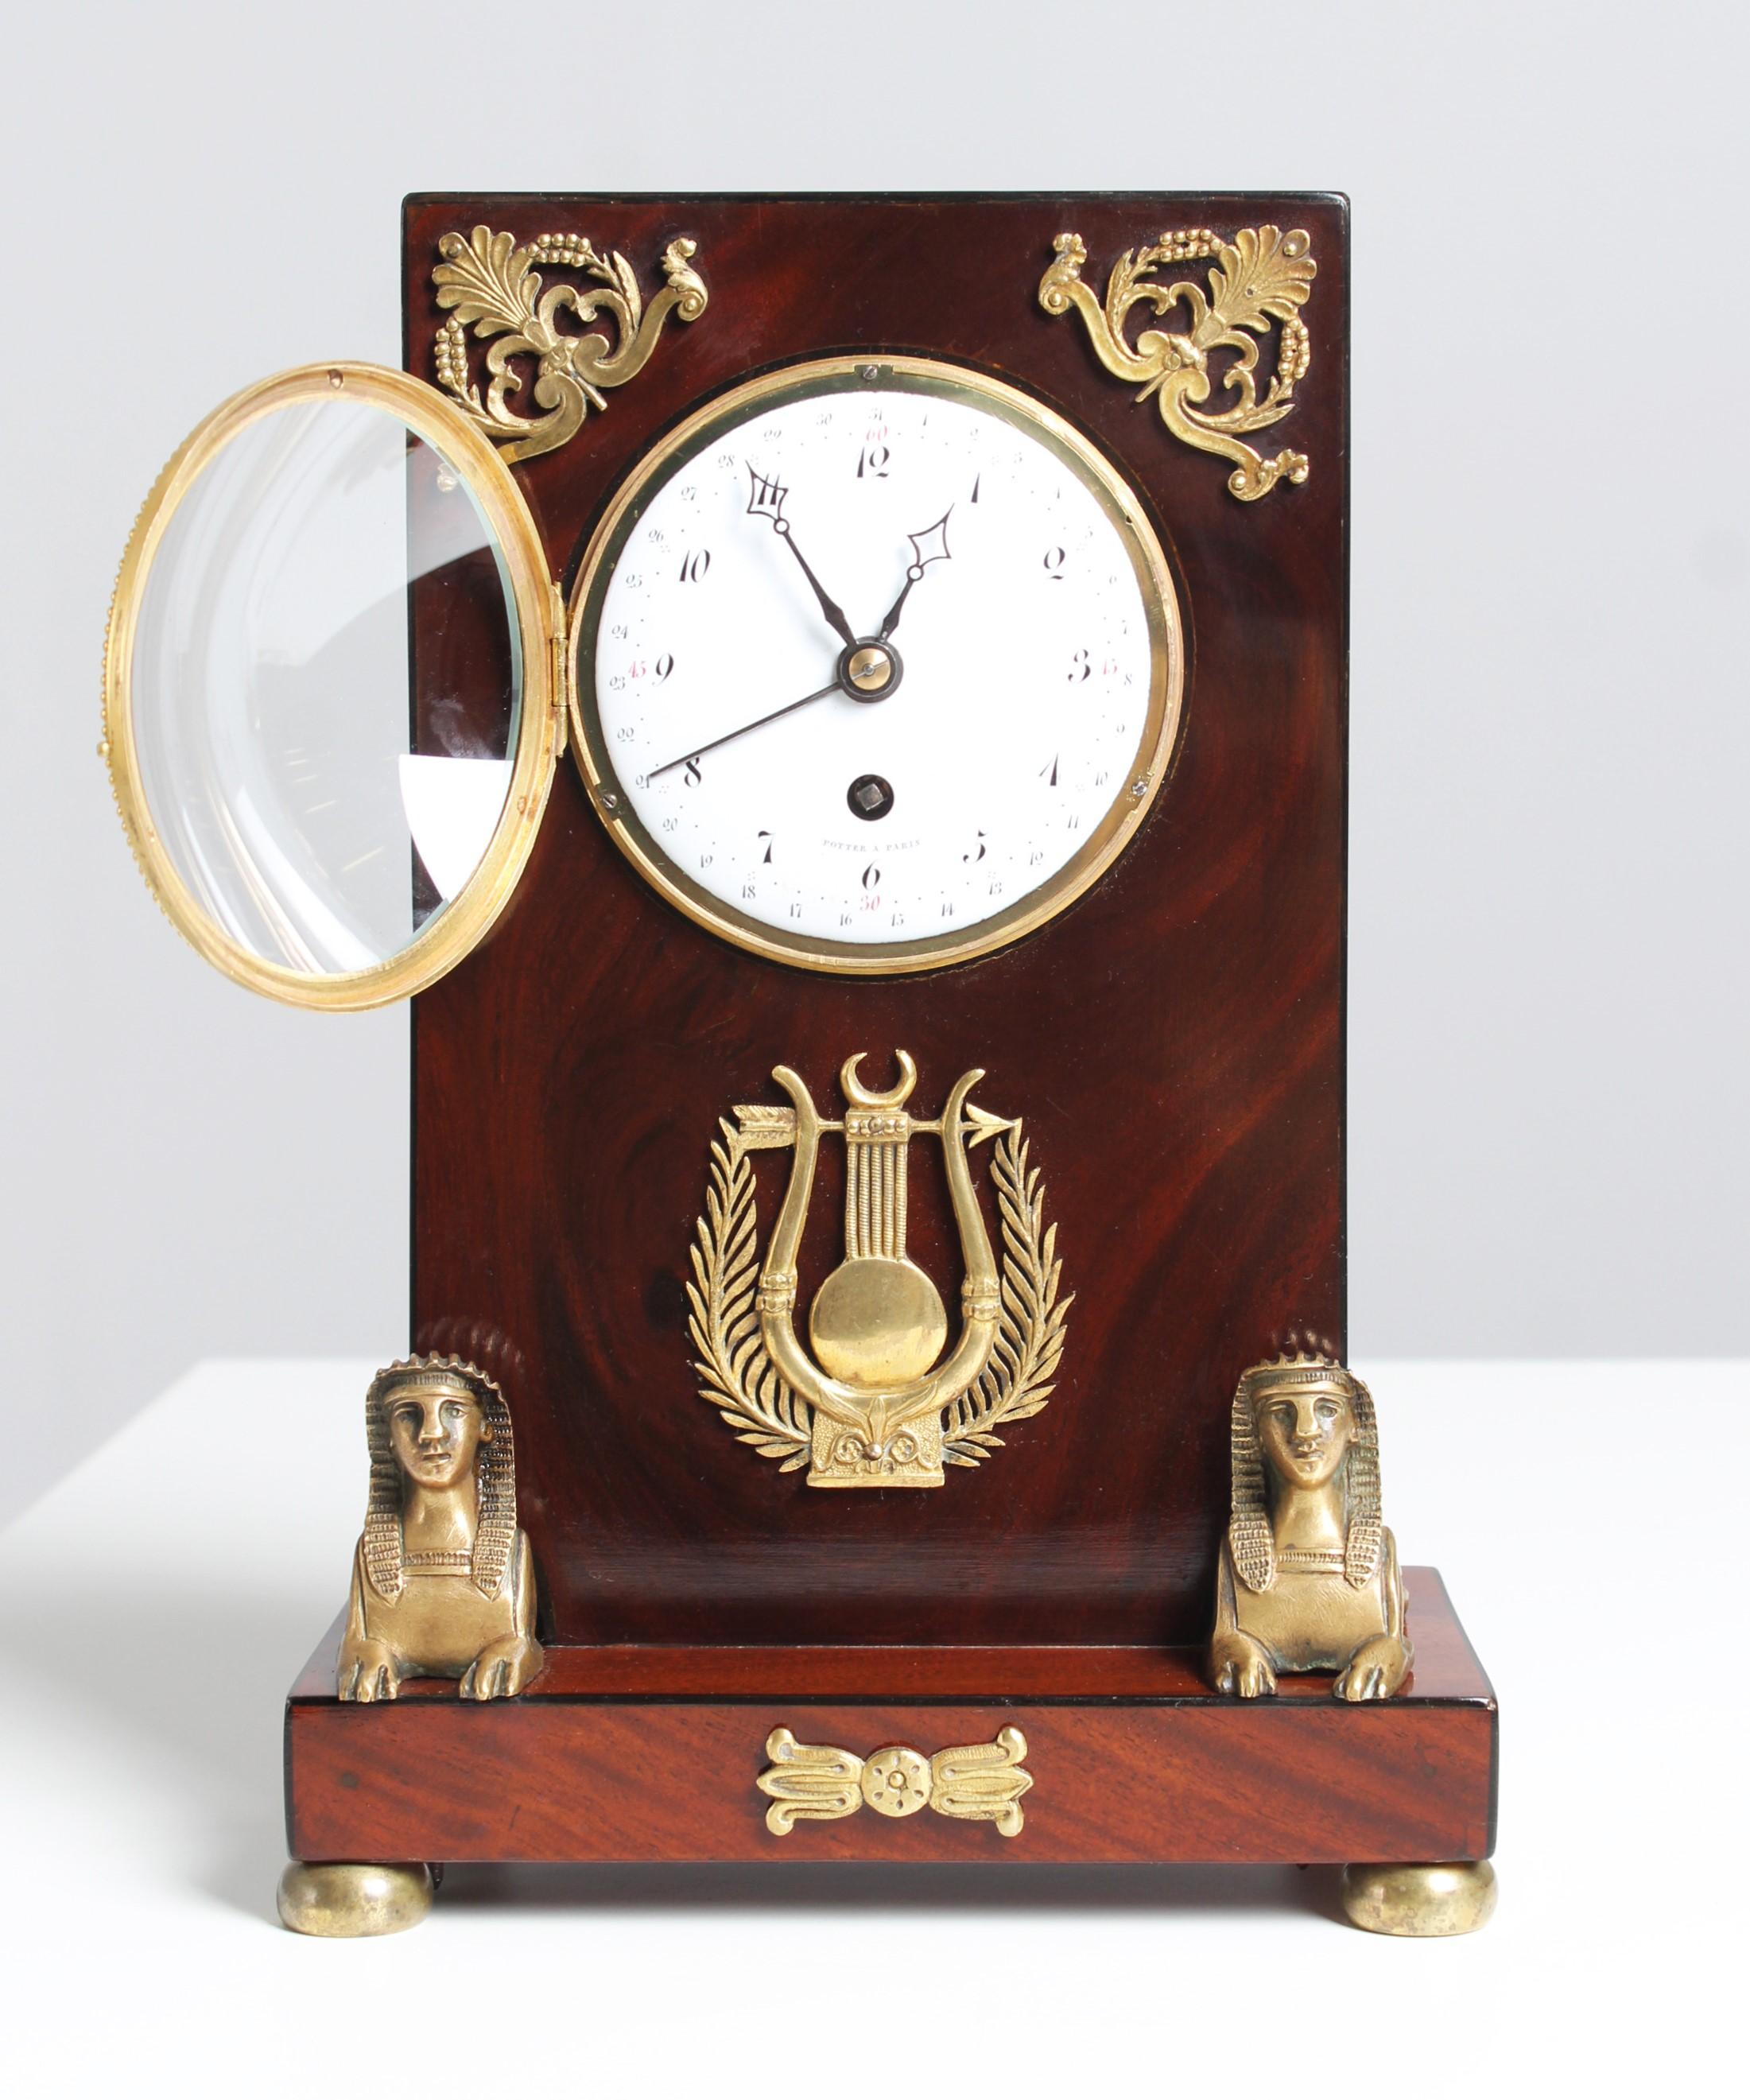 Antique Retour d'Egypte mantel clock

France
Mahogany
first half of 19th century

Dimensions: H x W x D: 29 x 20 x 12 cm

Description:
Extraordinarily small Empire mantel clock in a mahogany case. So-called Pendule d'Audience.

Base plate standing